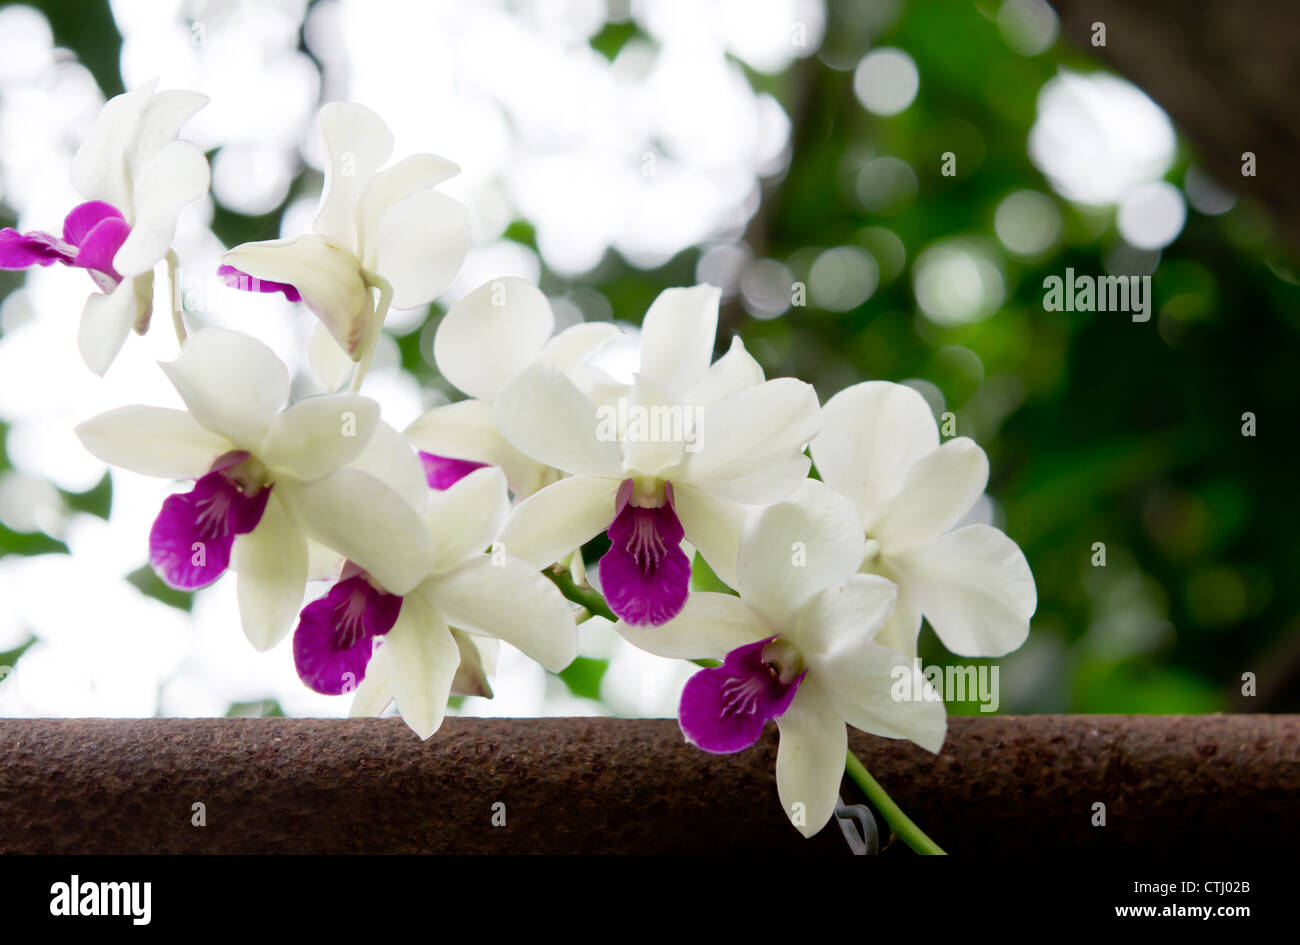 full of fresh white and violet orchids blooms in garden Stock Photo